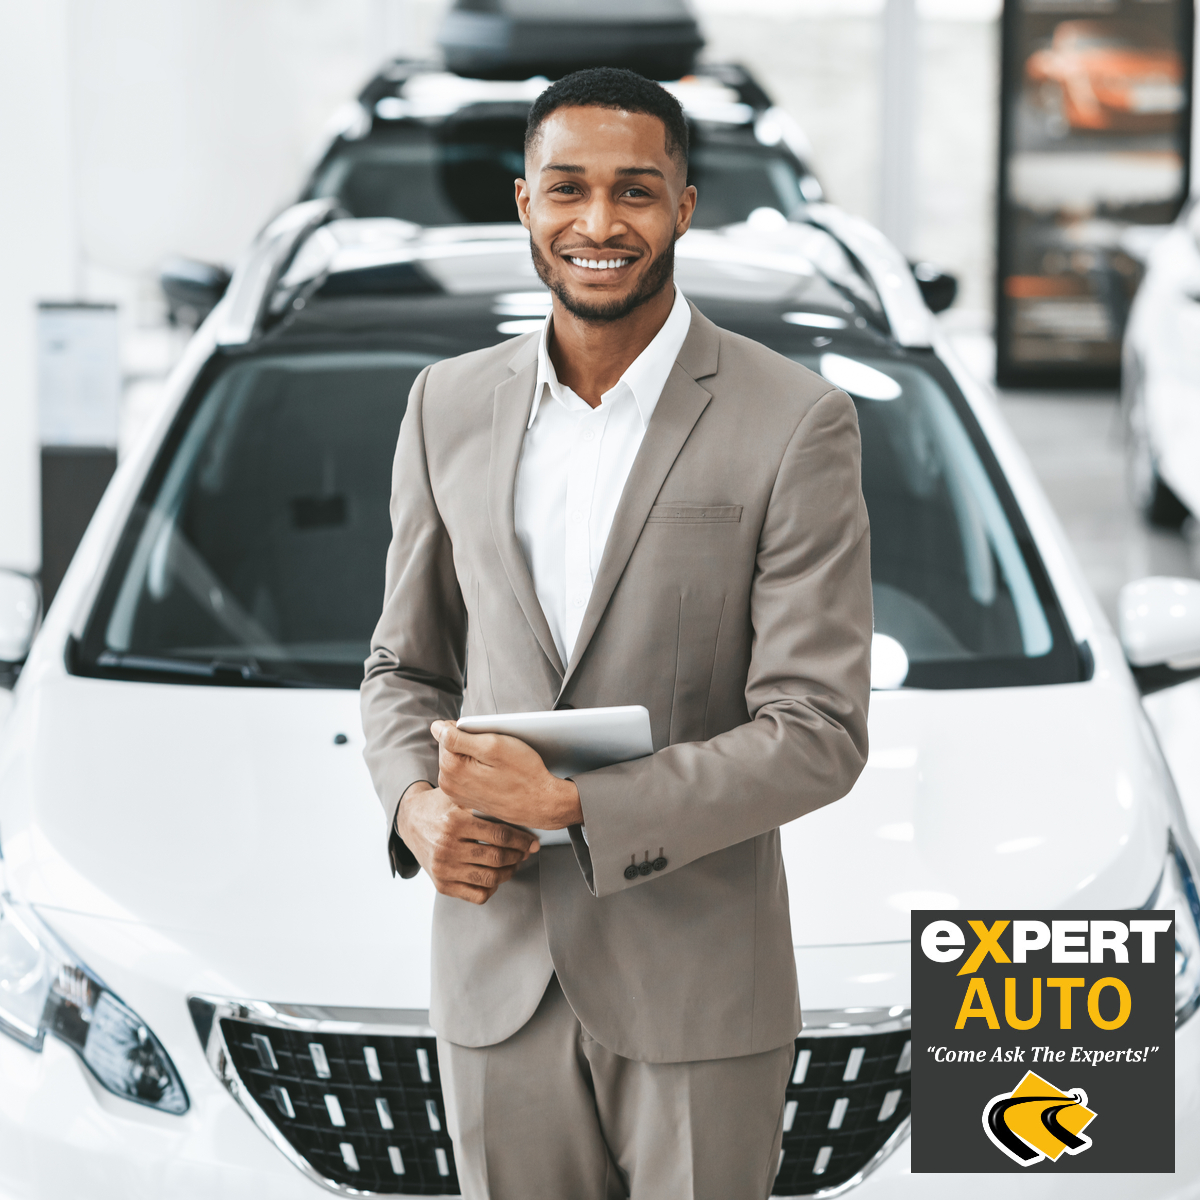 Make Time To Visit Our Car Dealership In Temple Hills